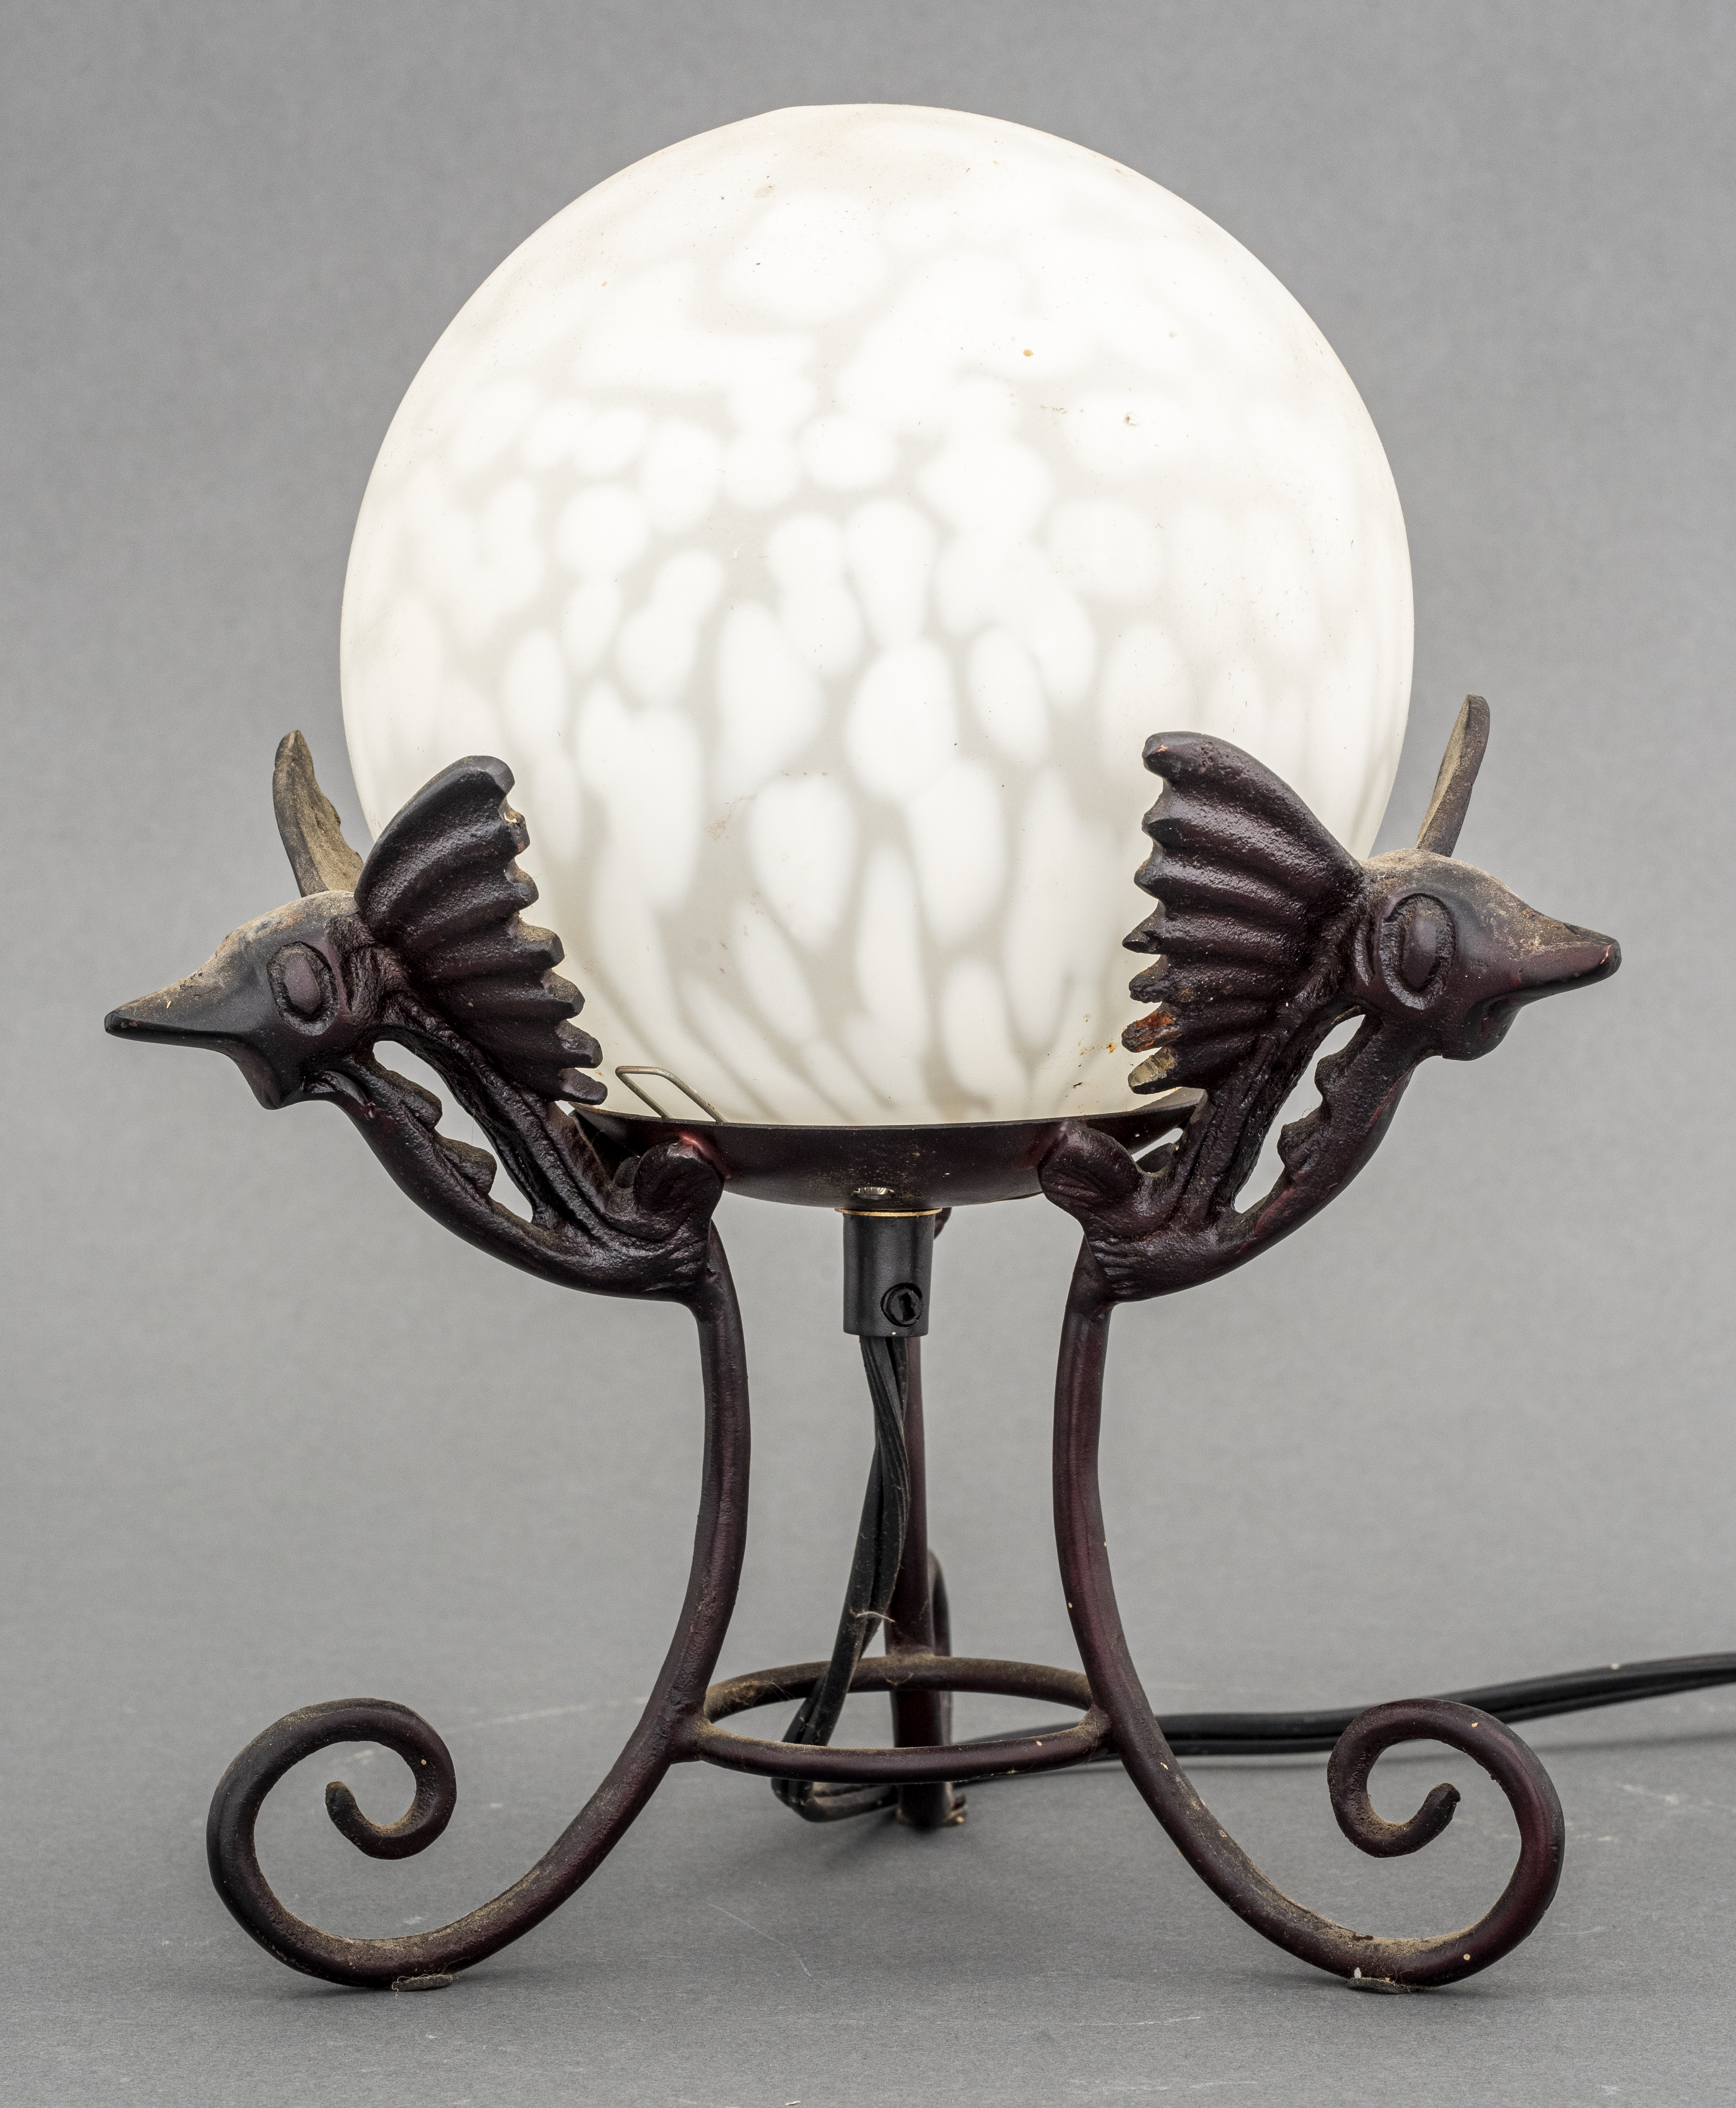 CAST IRON AND GLASS DRAGON TABLE 363c55